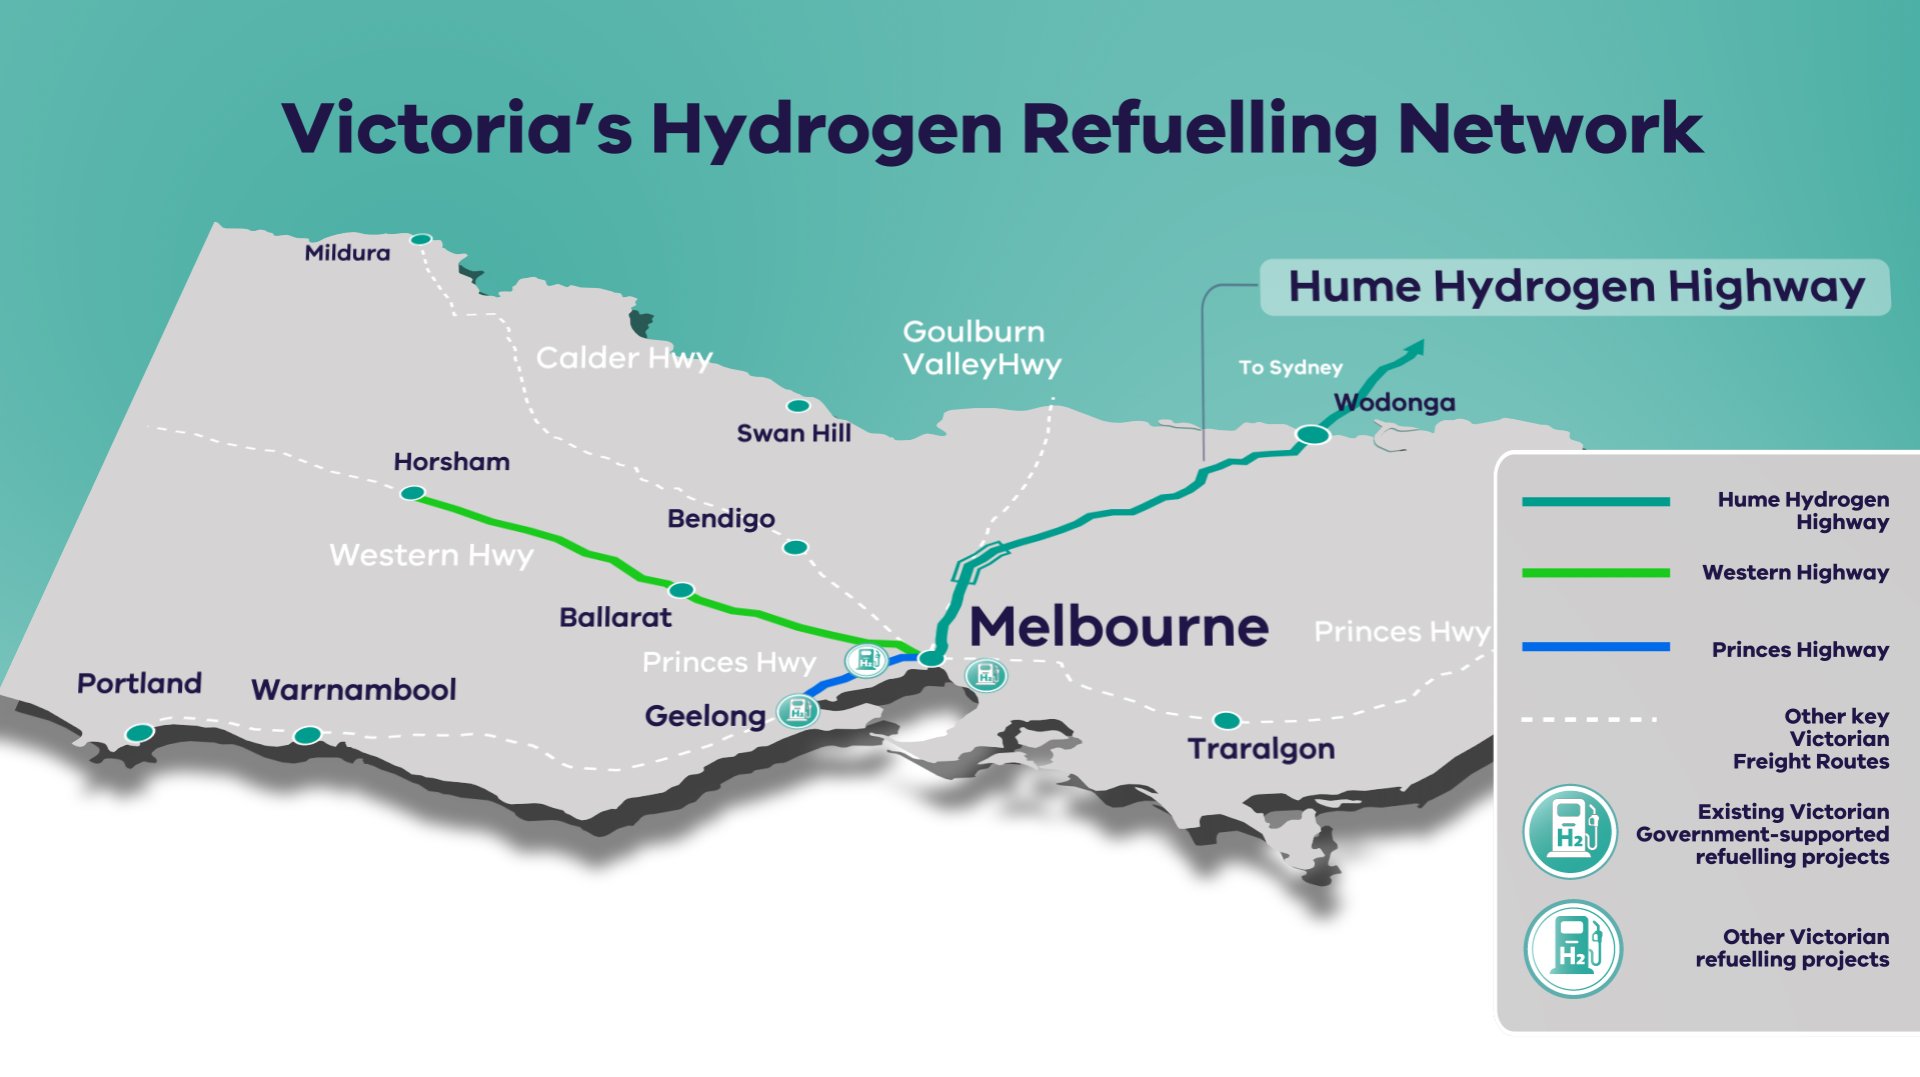 Victorian Government image of the state's hydrogen refuelling network